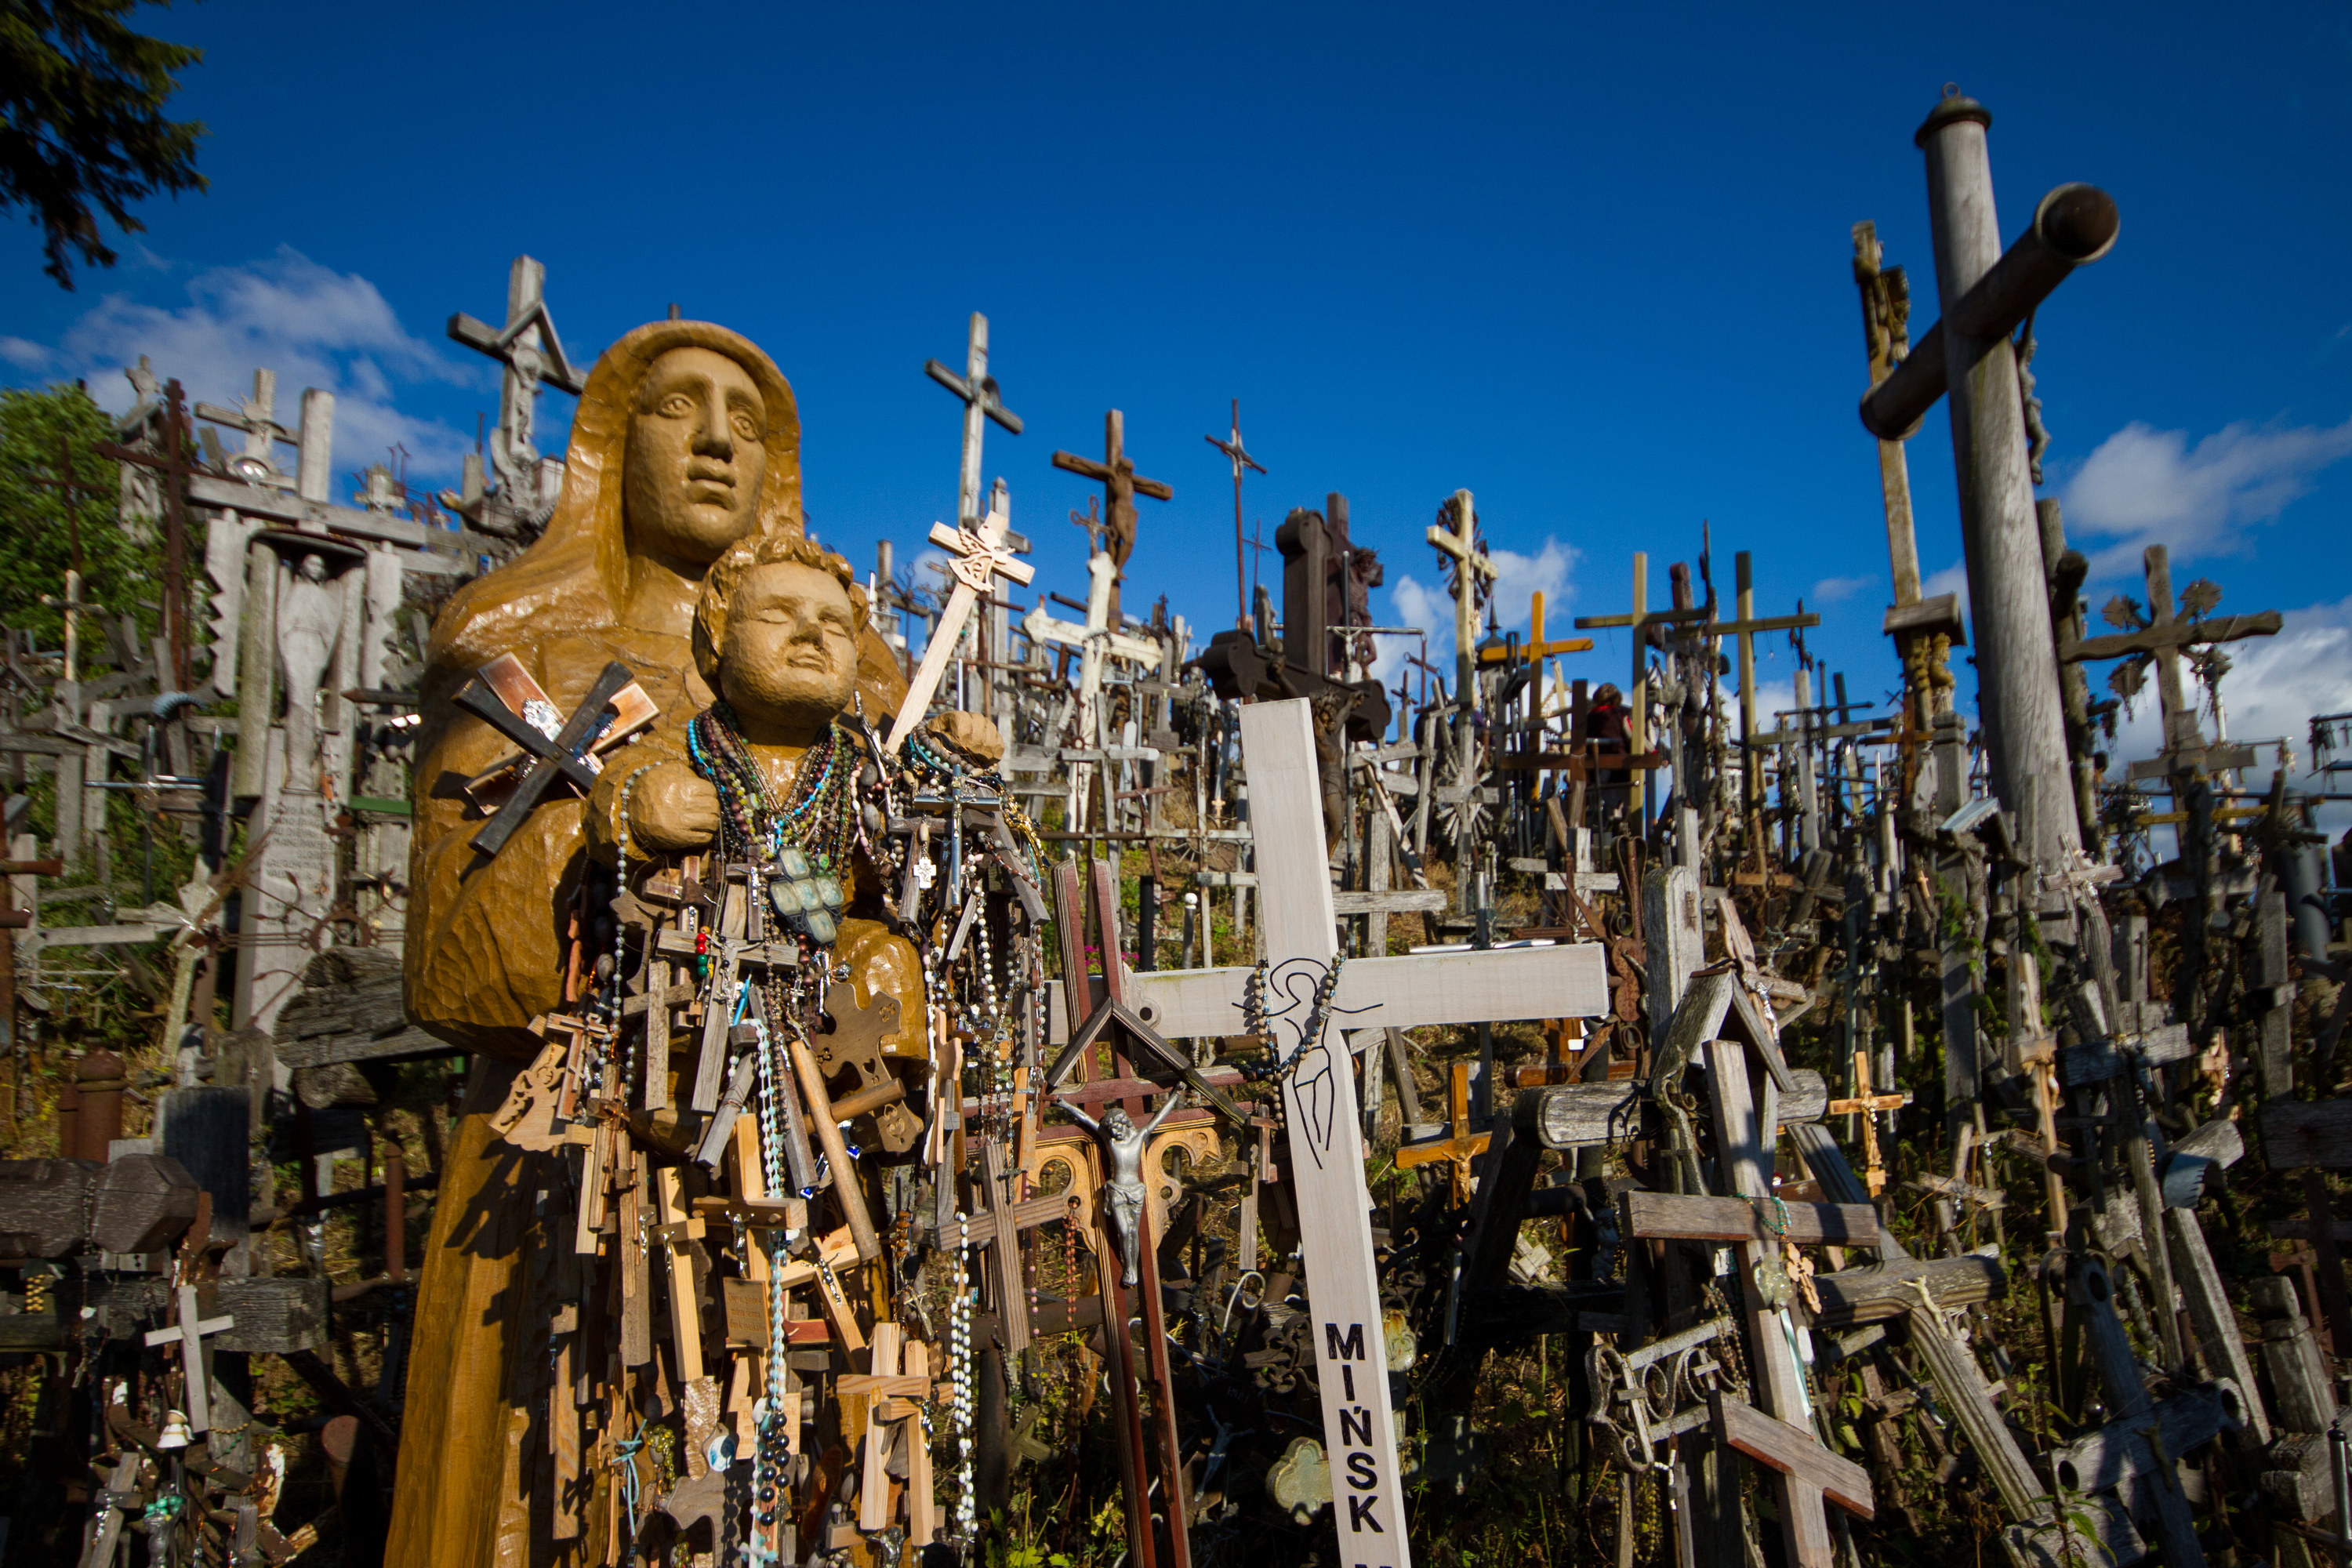 Hill covered in crosses of all sizes and a statue of a mother and child